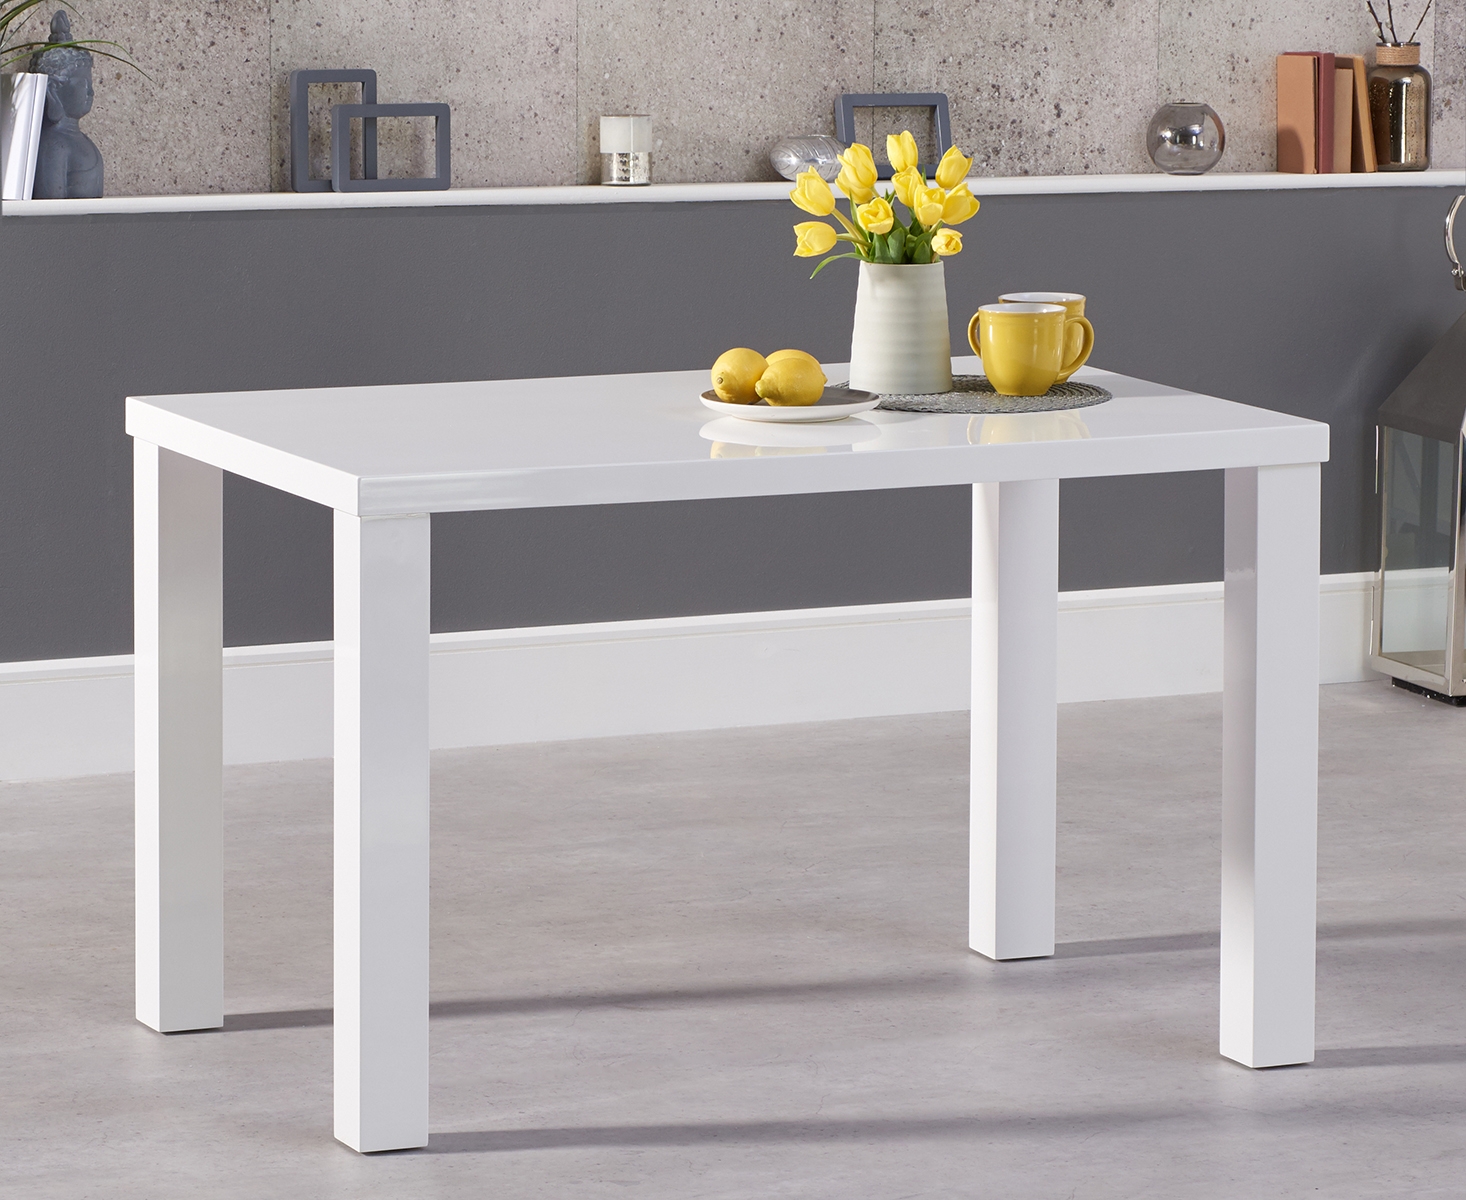 Photo 2 of Seattle 120cm white high gloss dining table with austin grey benches